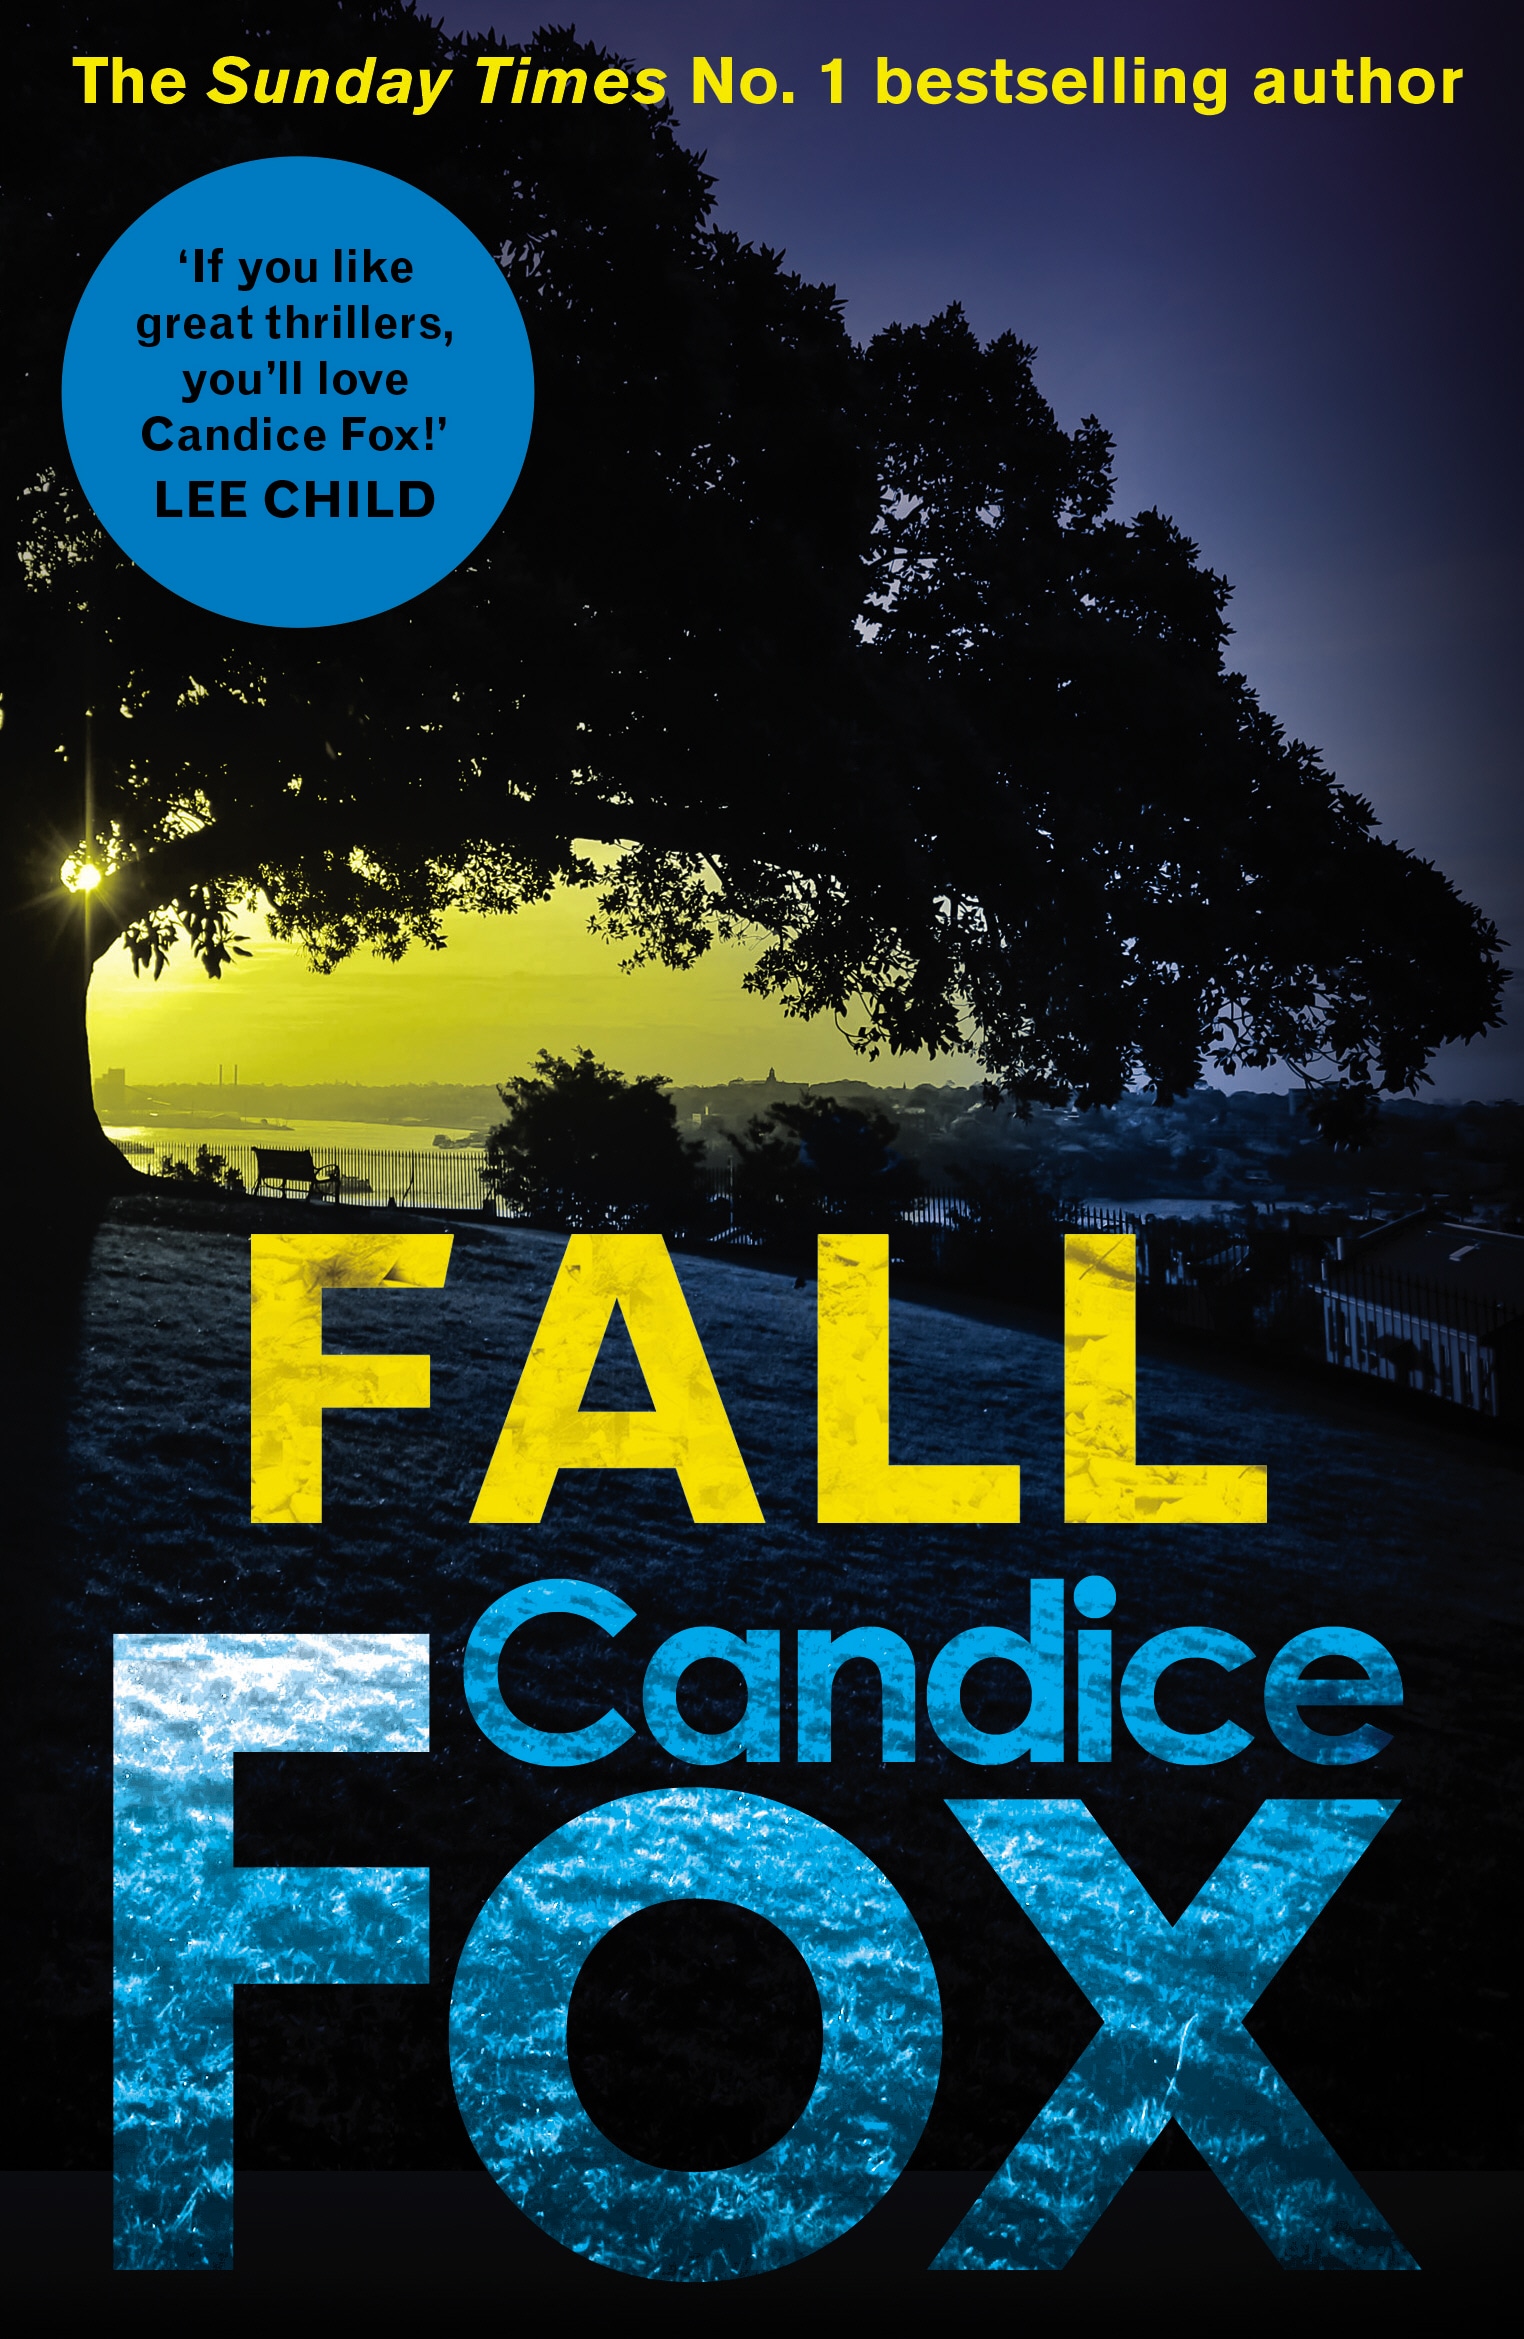 Book “Fall” by Candice Fox — February 7, 2019